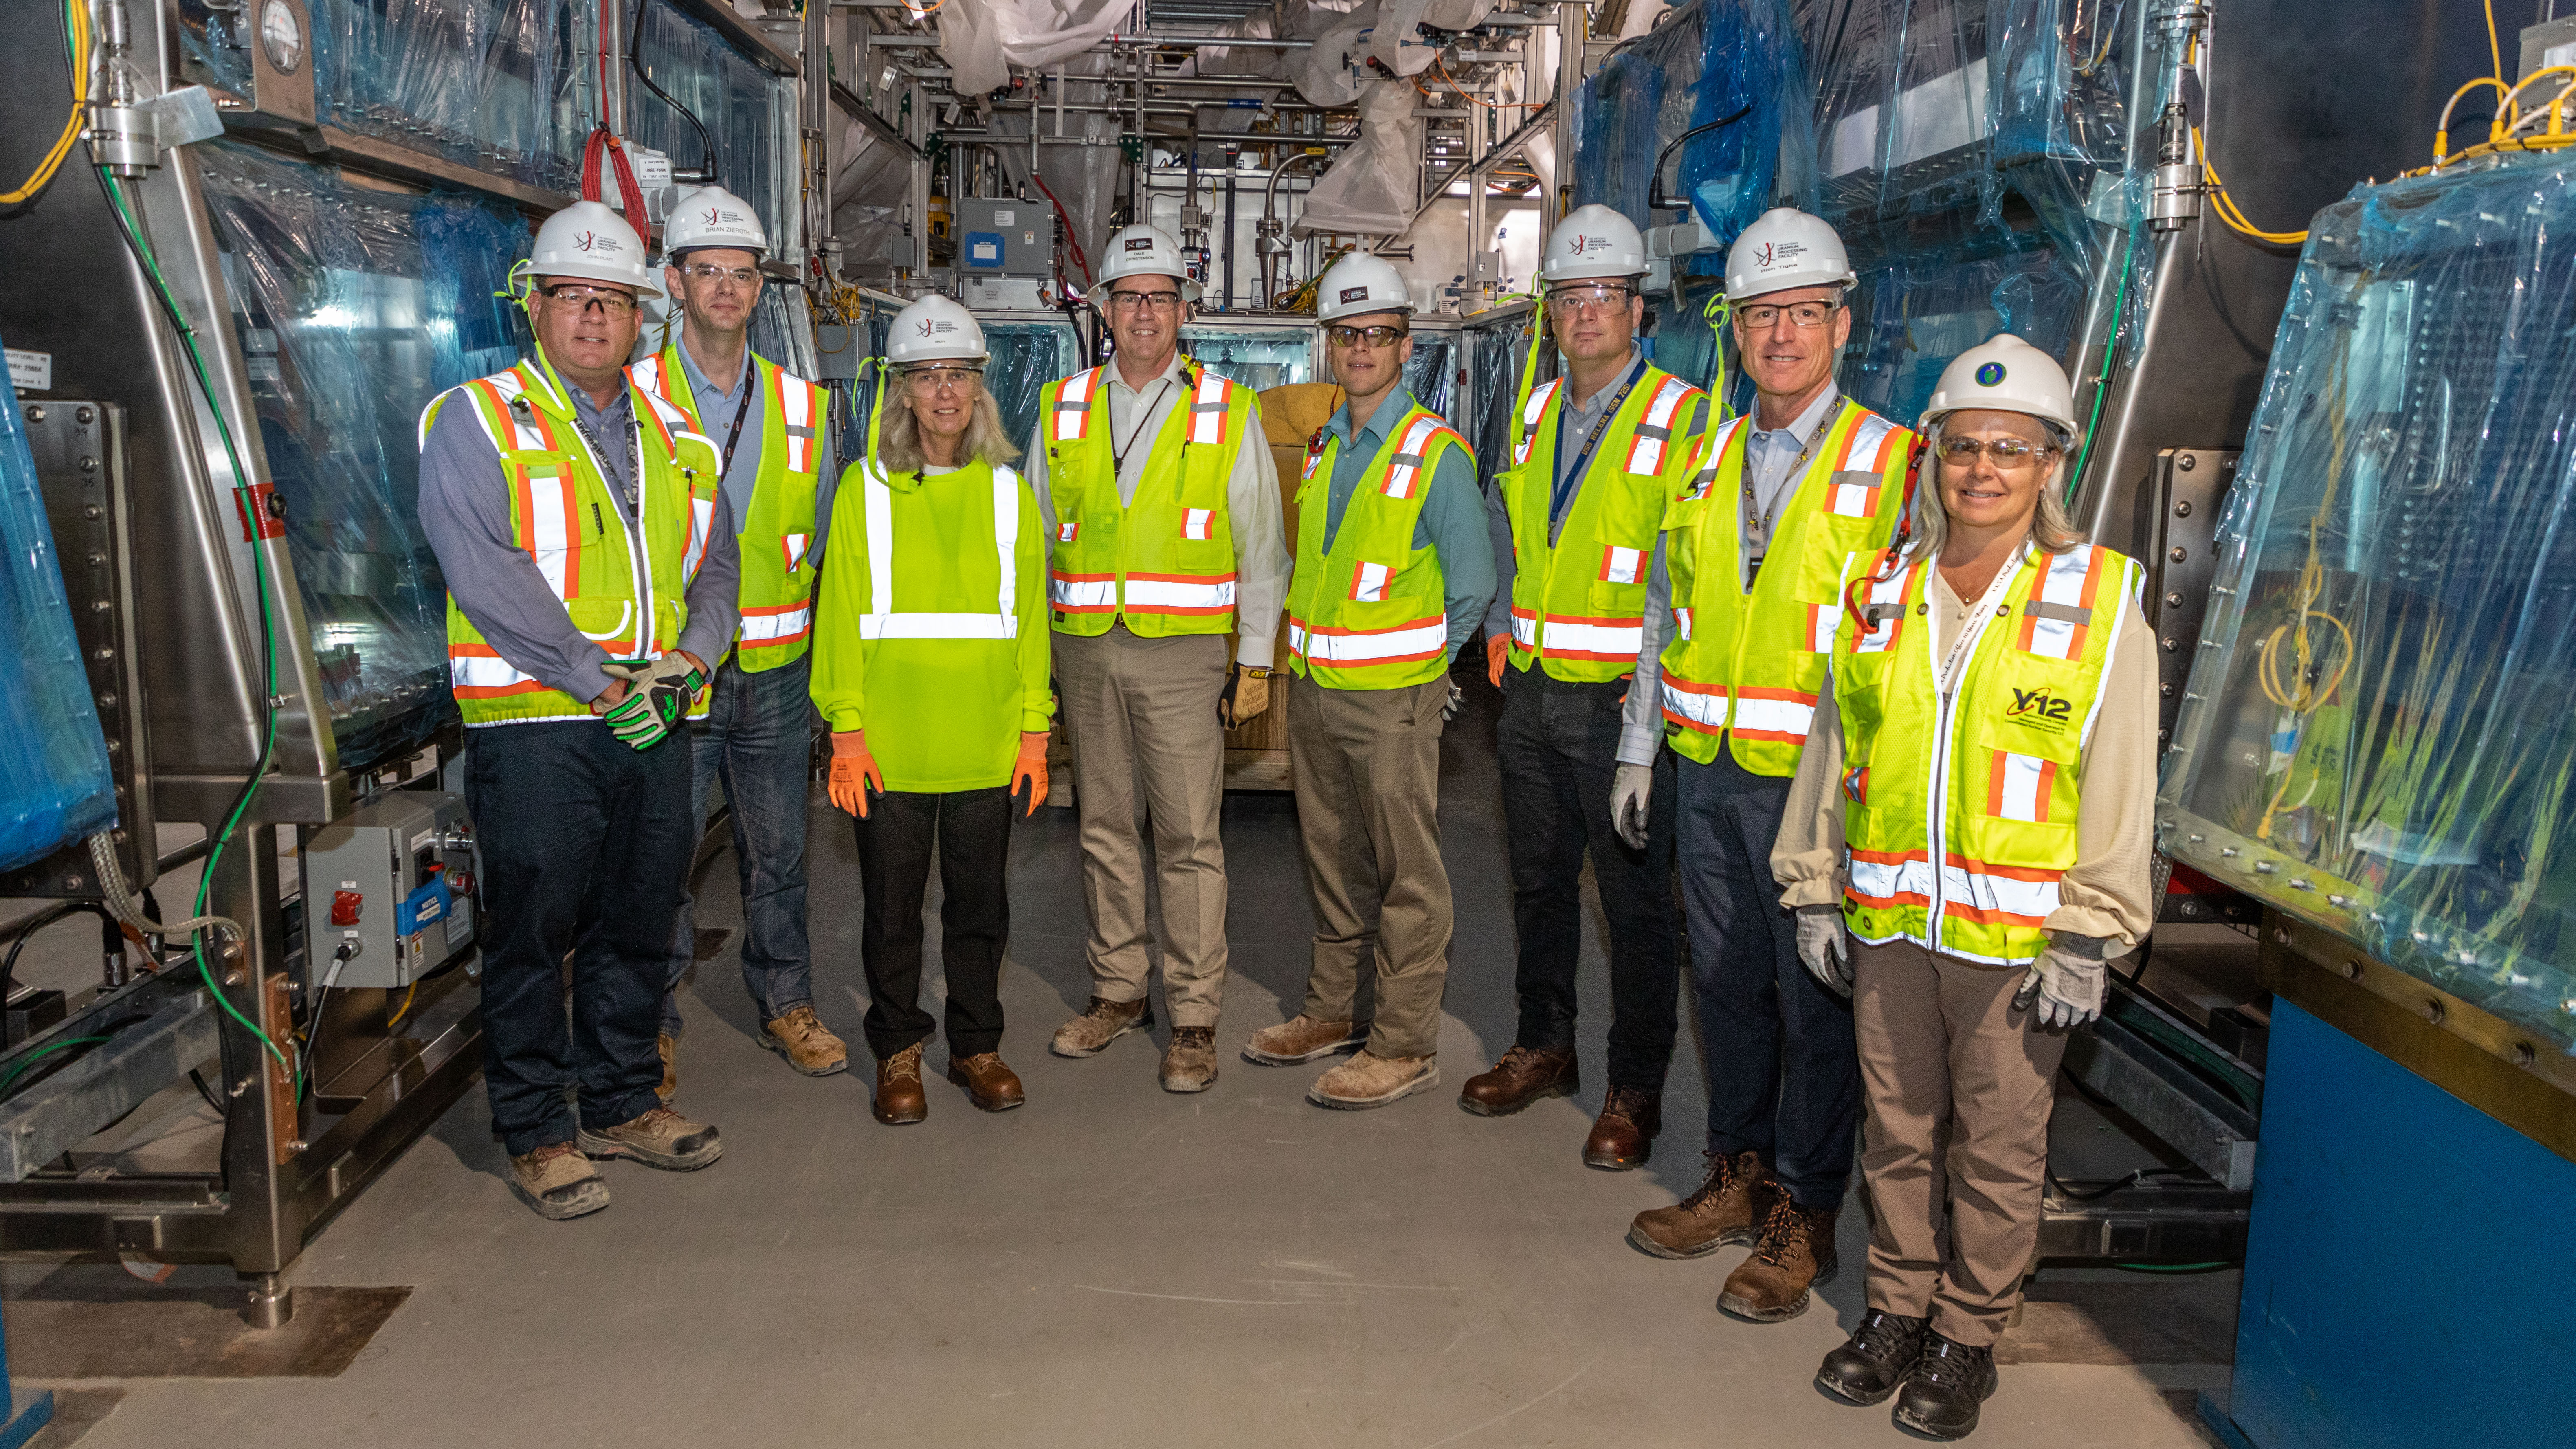 Under Secretary of Energy for Nuclear Security and NNSA Administrator Jill Hruby UPF tour 